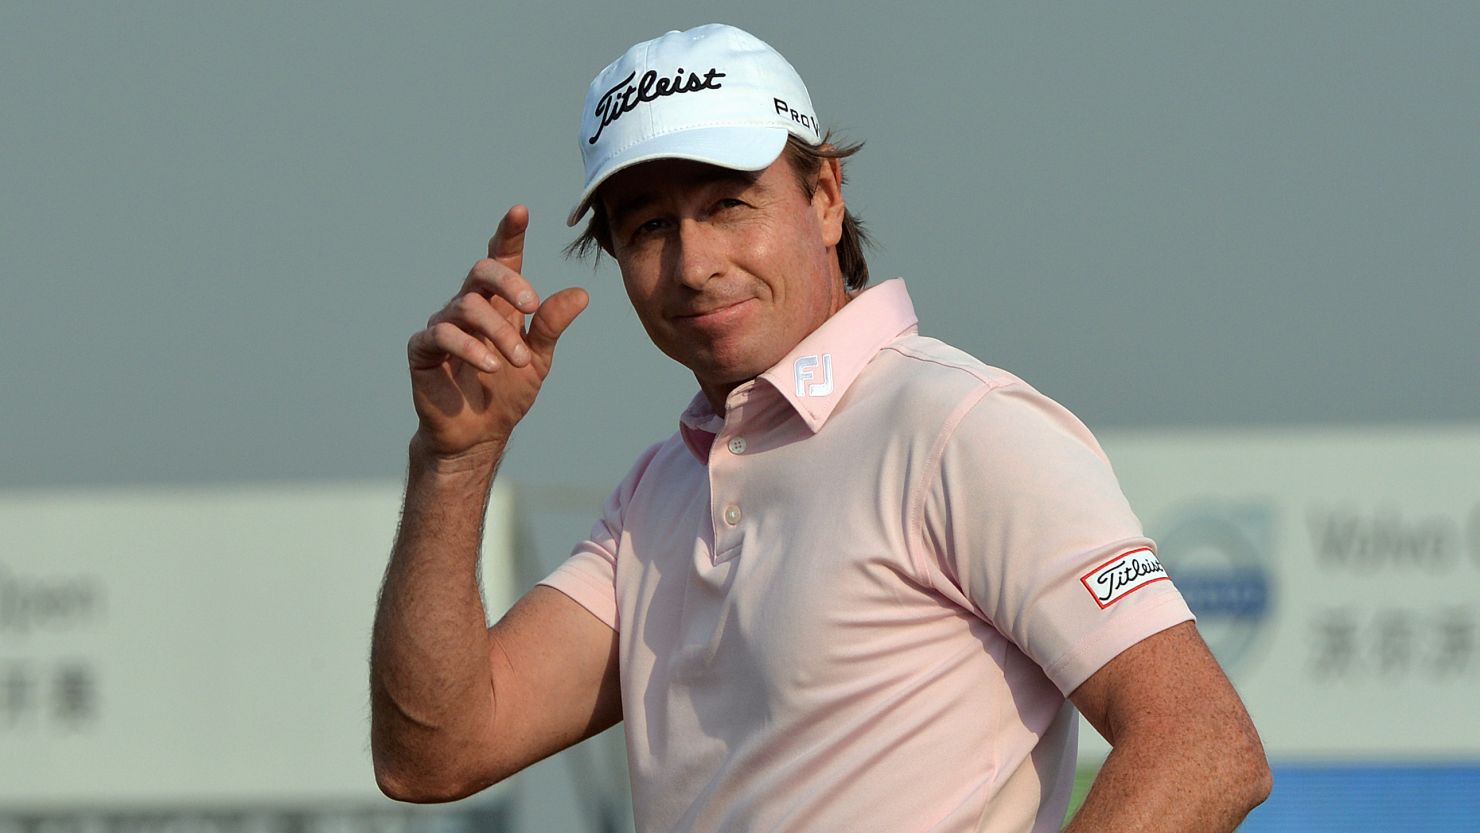 Australia's Brett Rumford was in confident mood as he finished his third round at the China Open.